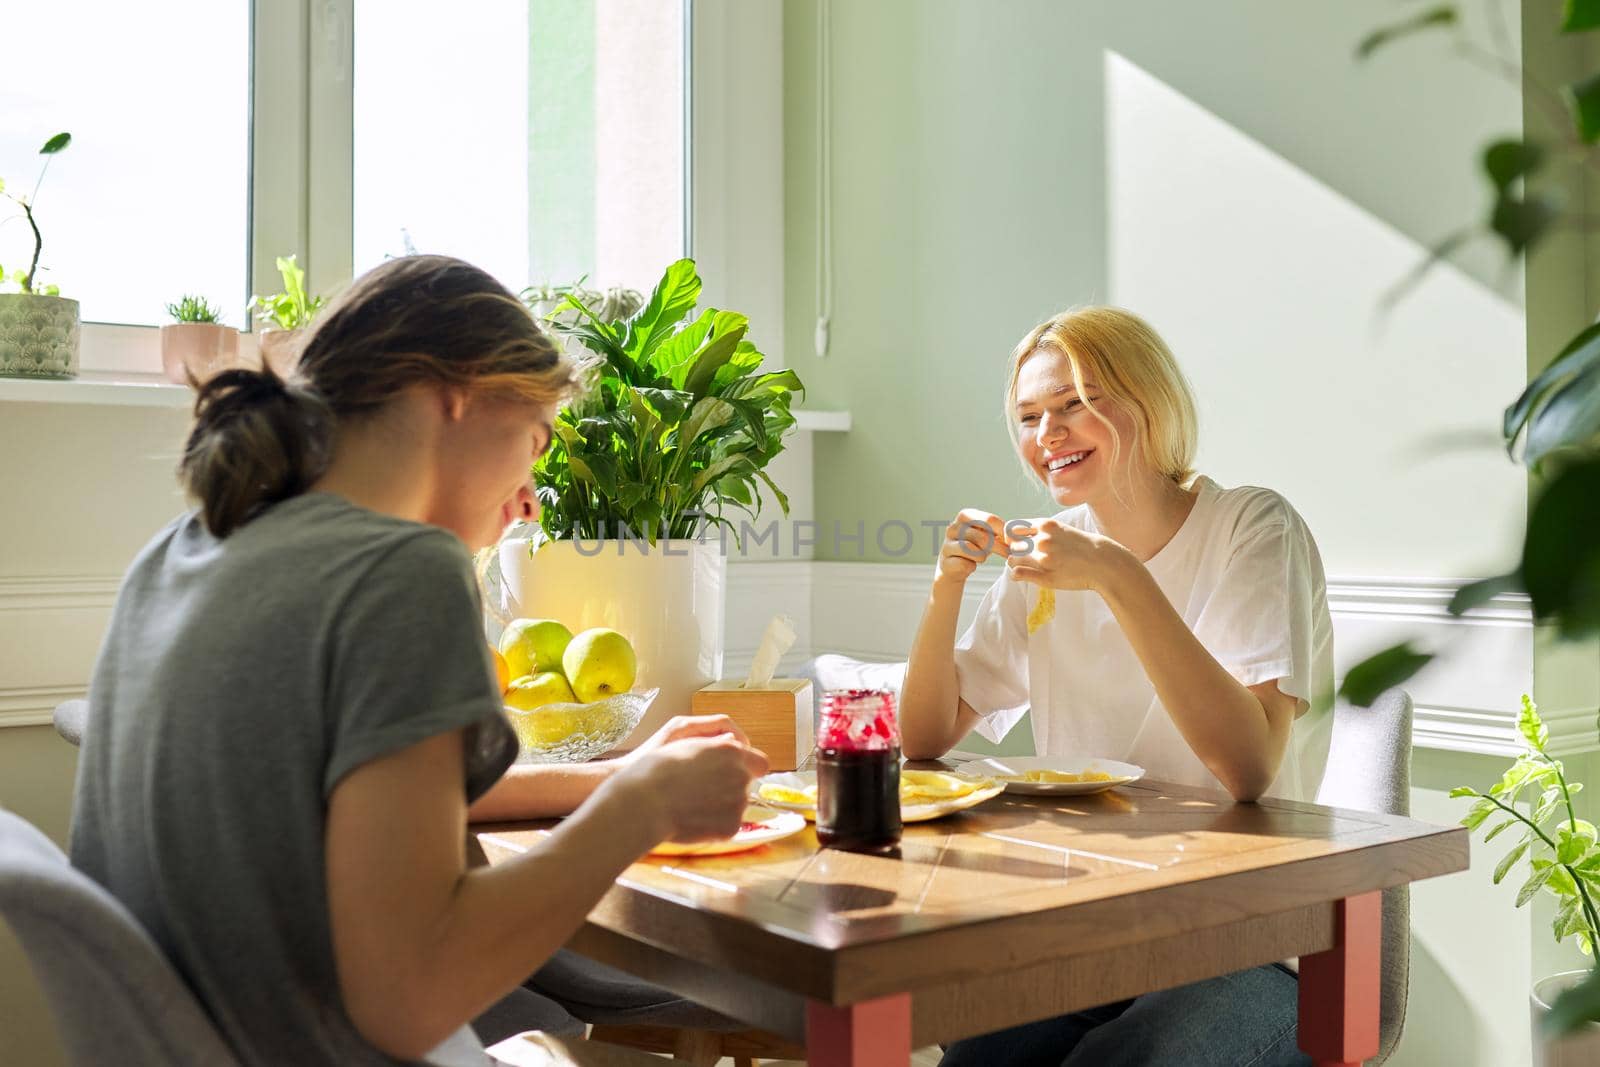 Teenagers guy and girl eating pancakes with jam, sitting at table at home. Homemade food, communication, teens, lifestyle concept